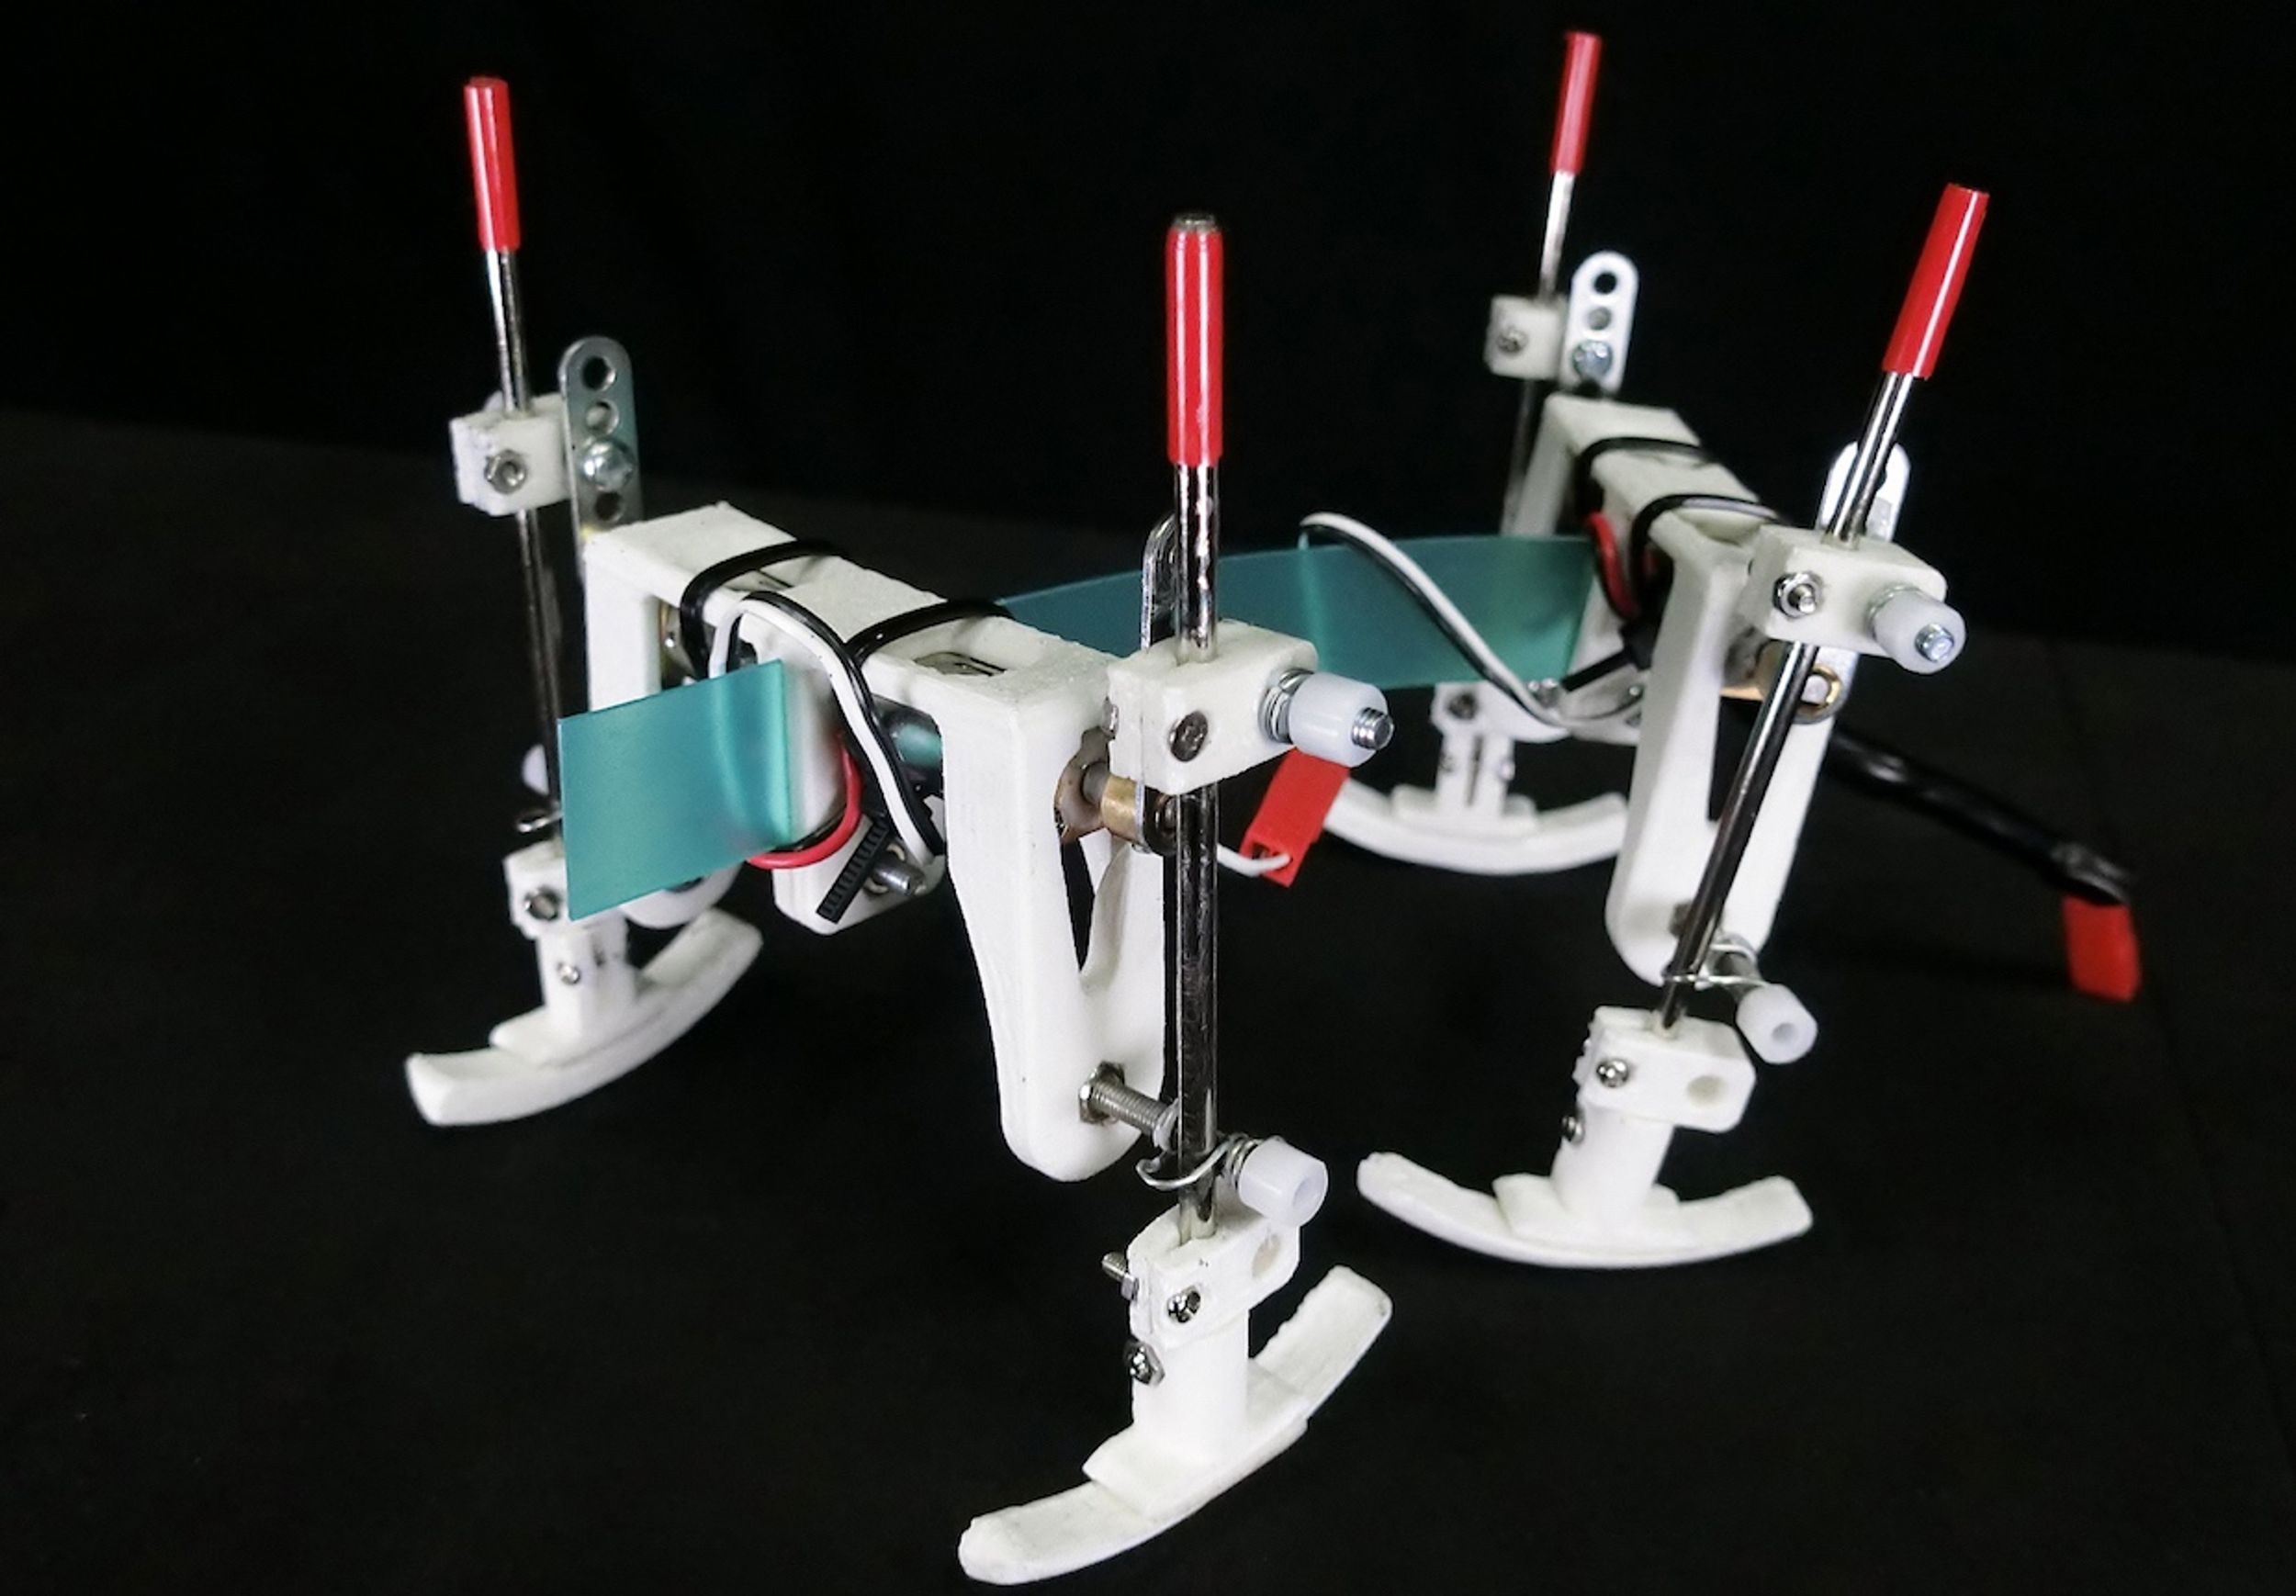 This robot has no sensors, no controller, and weak actuators, but it can autonomously generate a variety of gaits